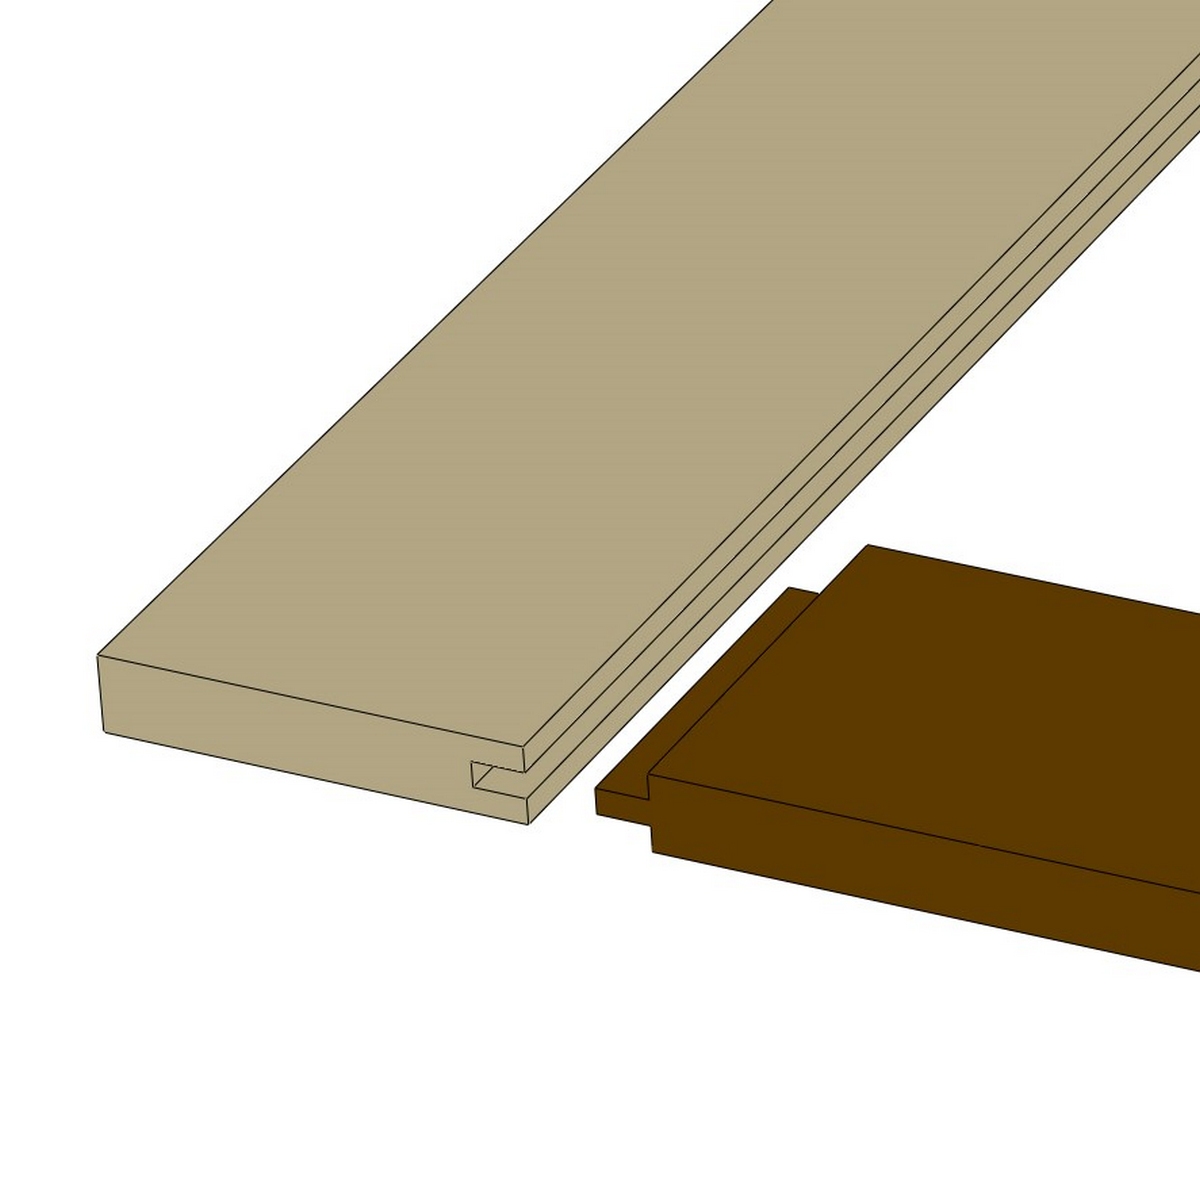 digital illustration of a tongue and groove joints